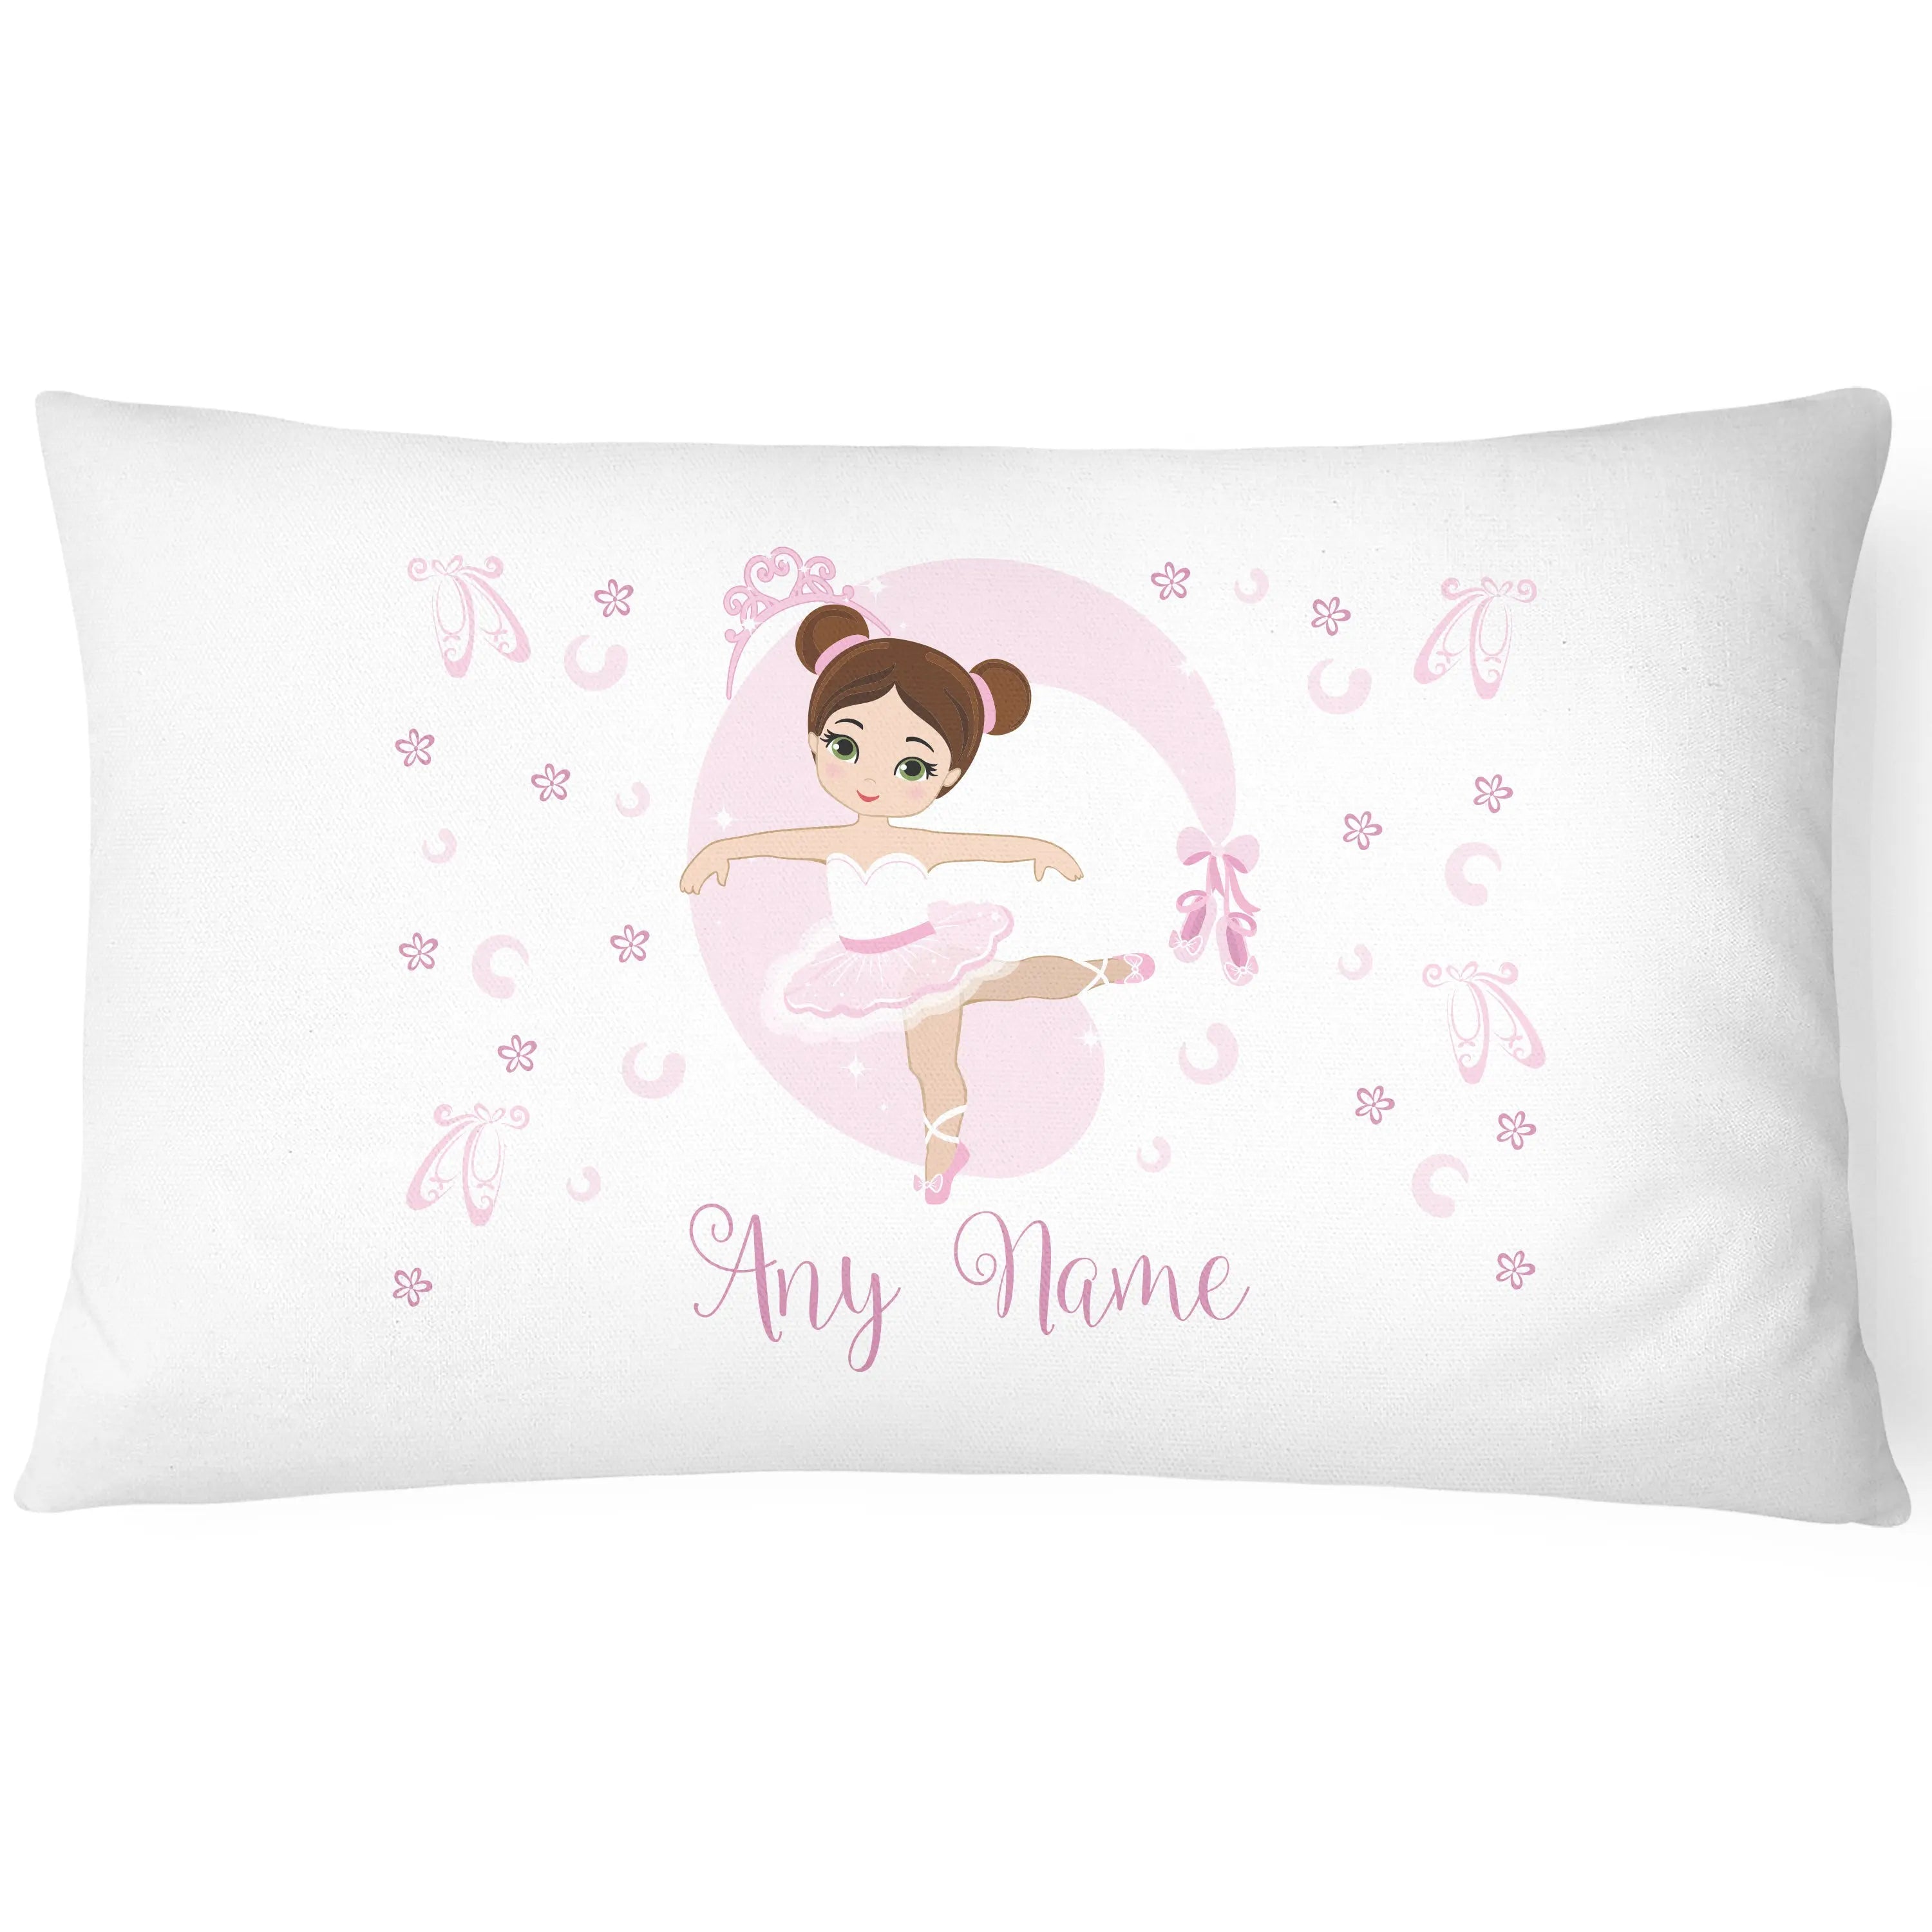 Ballerina Children's Pillowcase - Personalise with Any Name - Lovely - CushionPop